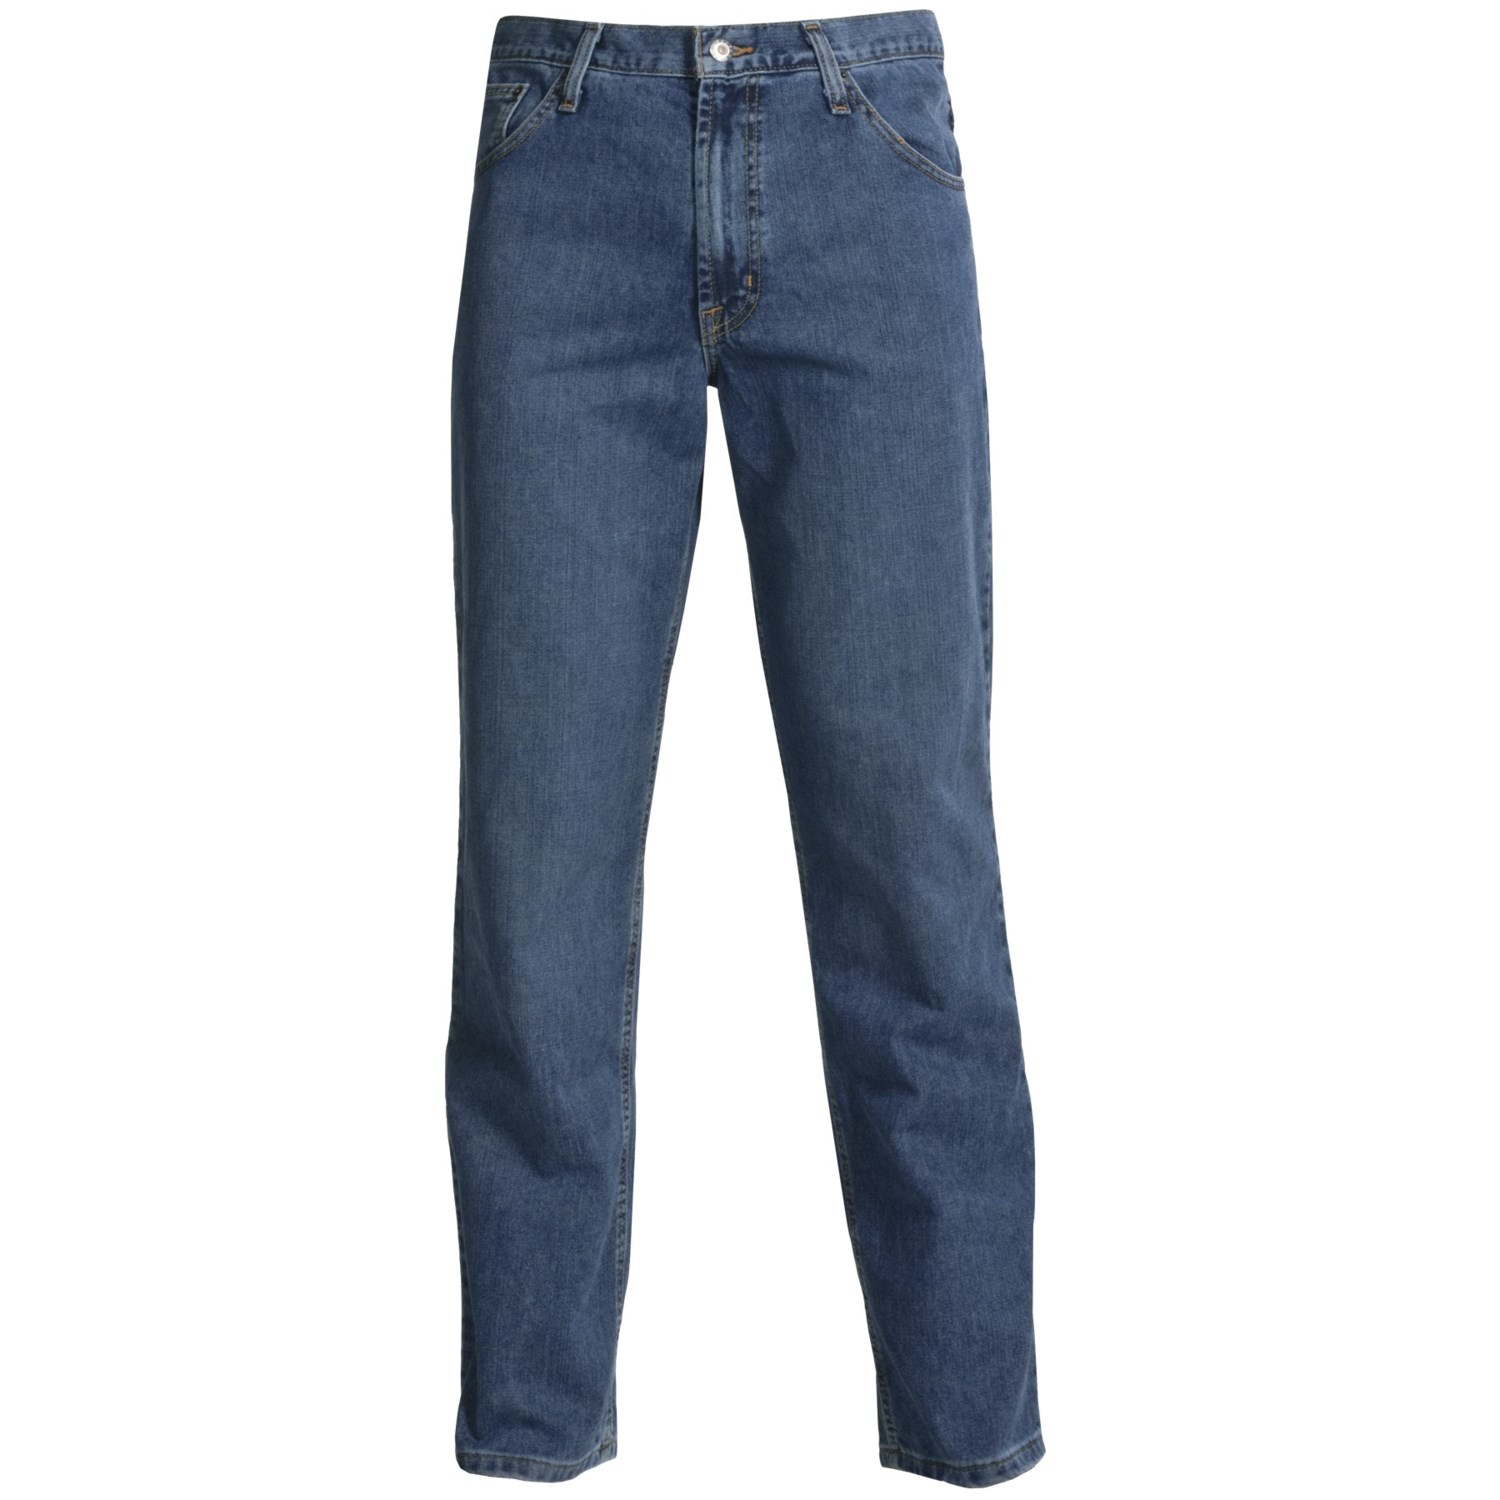 Cinch Green Label Special Edition Jeans (For Men) 4041W - Save 55%